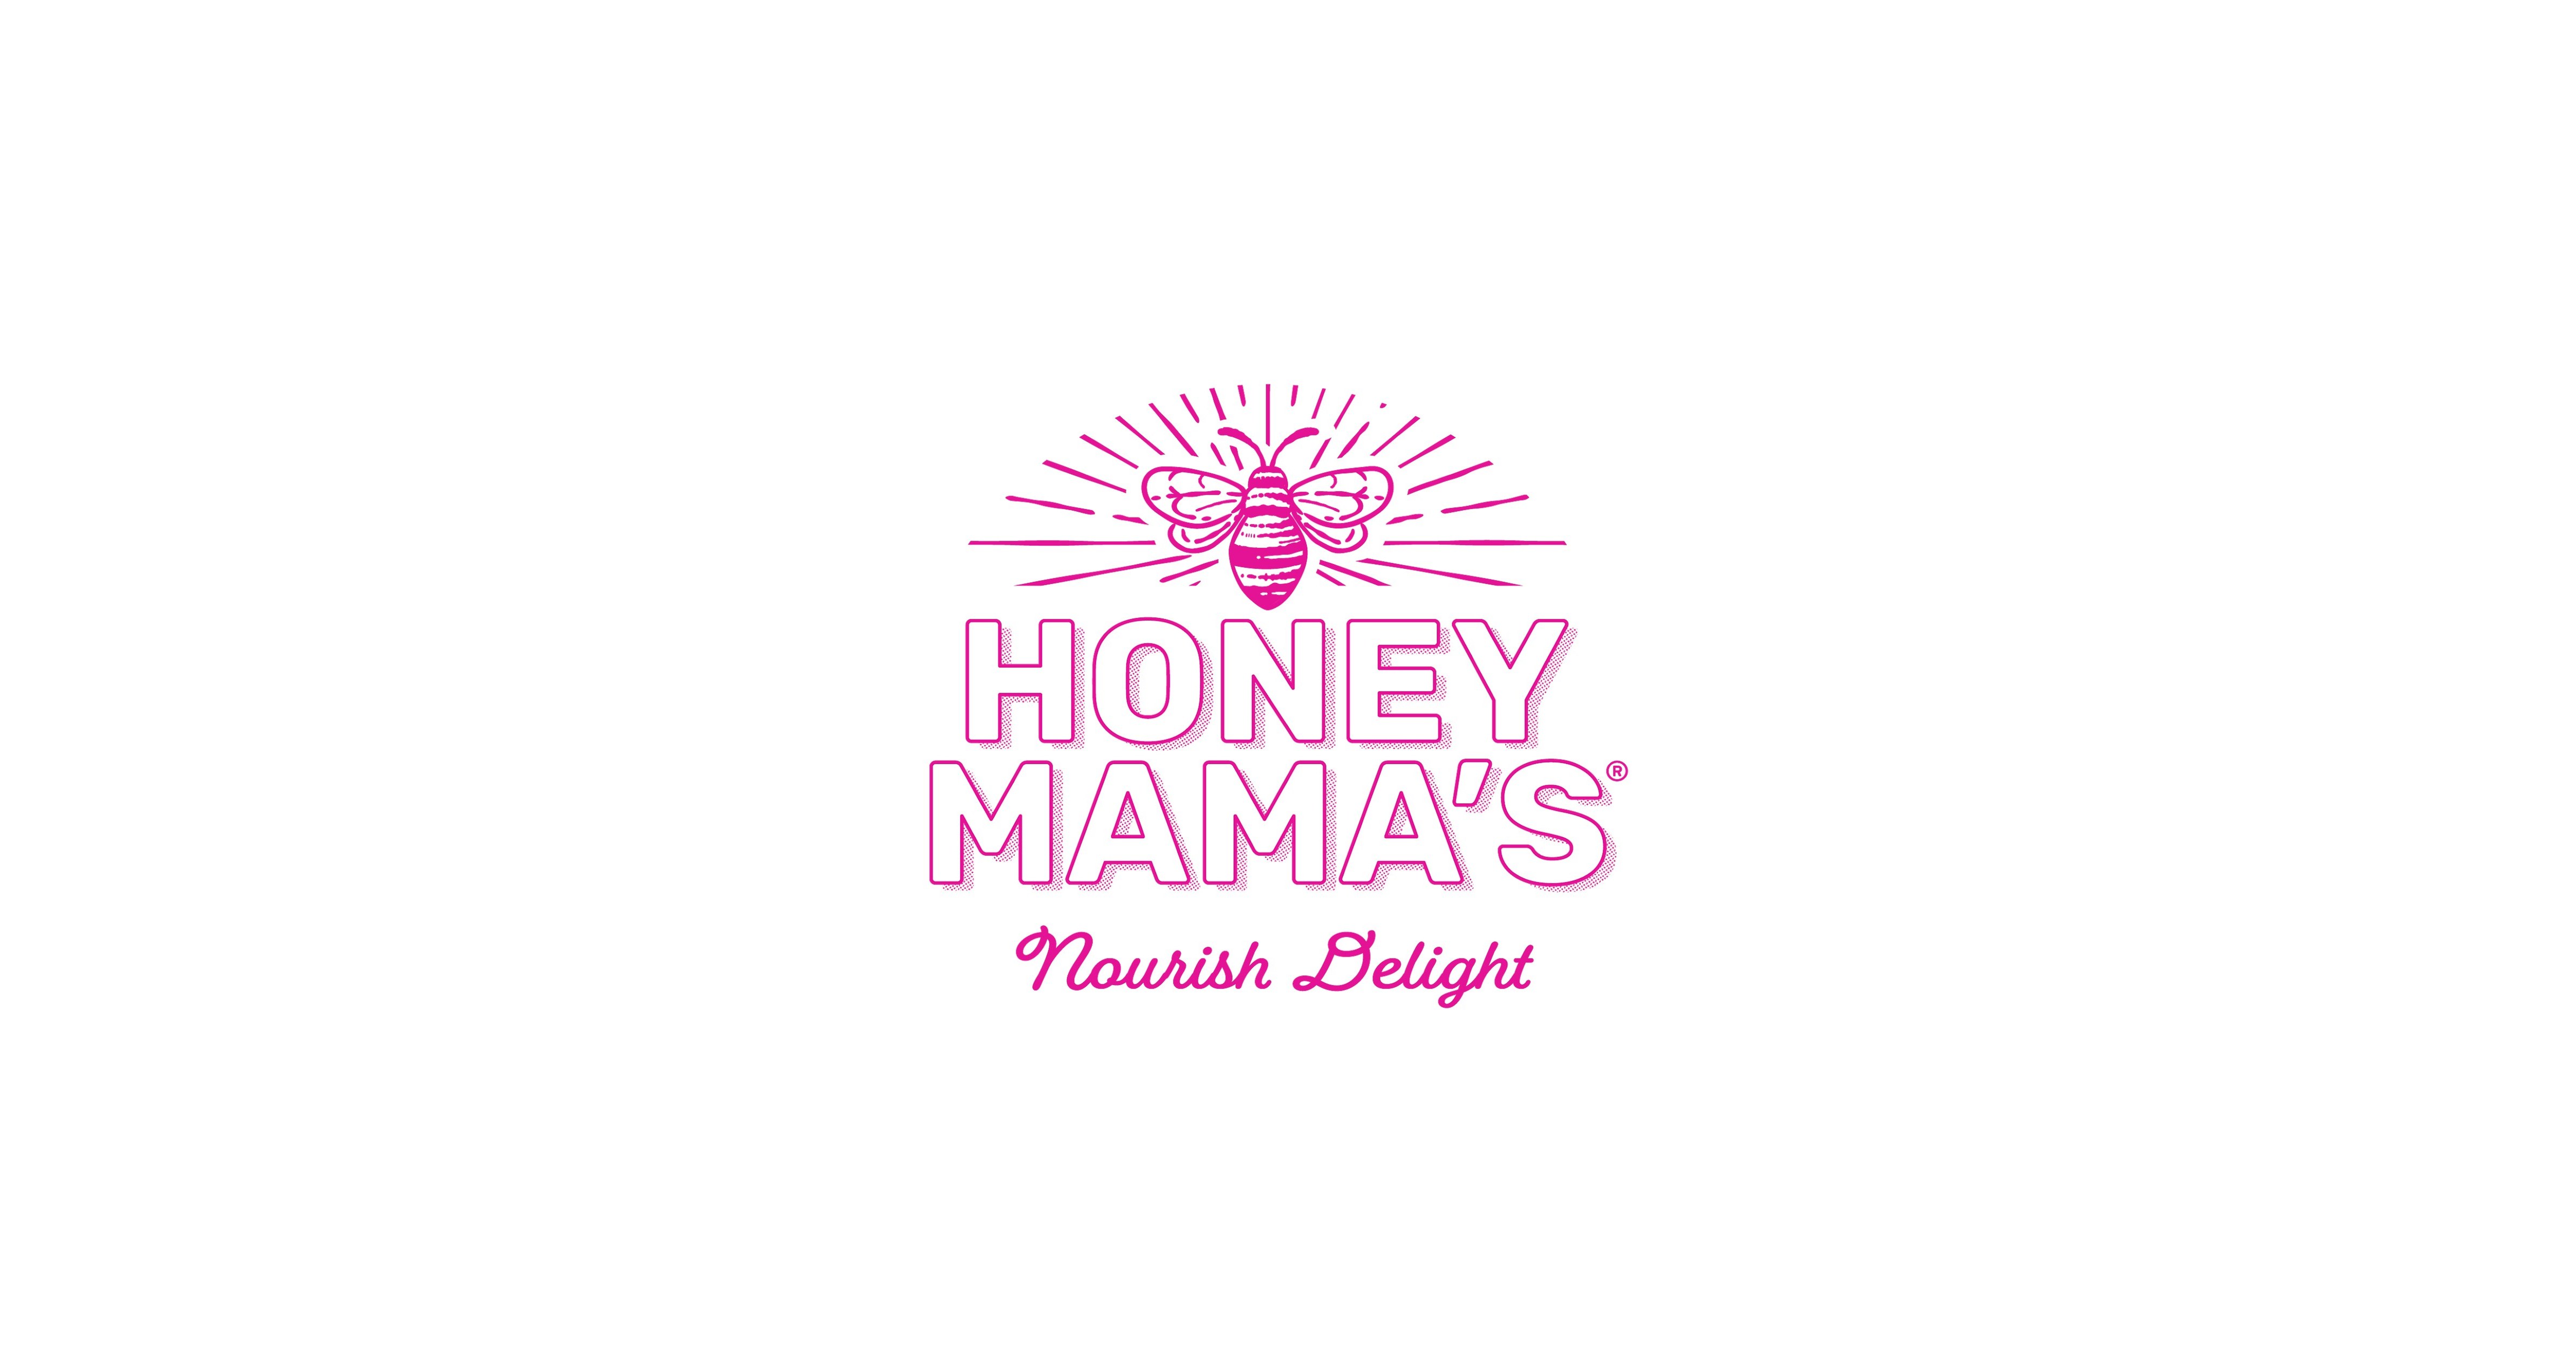 Honey Mama's closes $10.3M Series A with follow on investment from